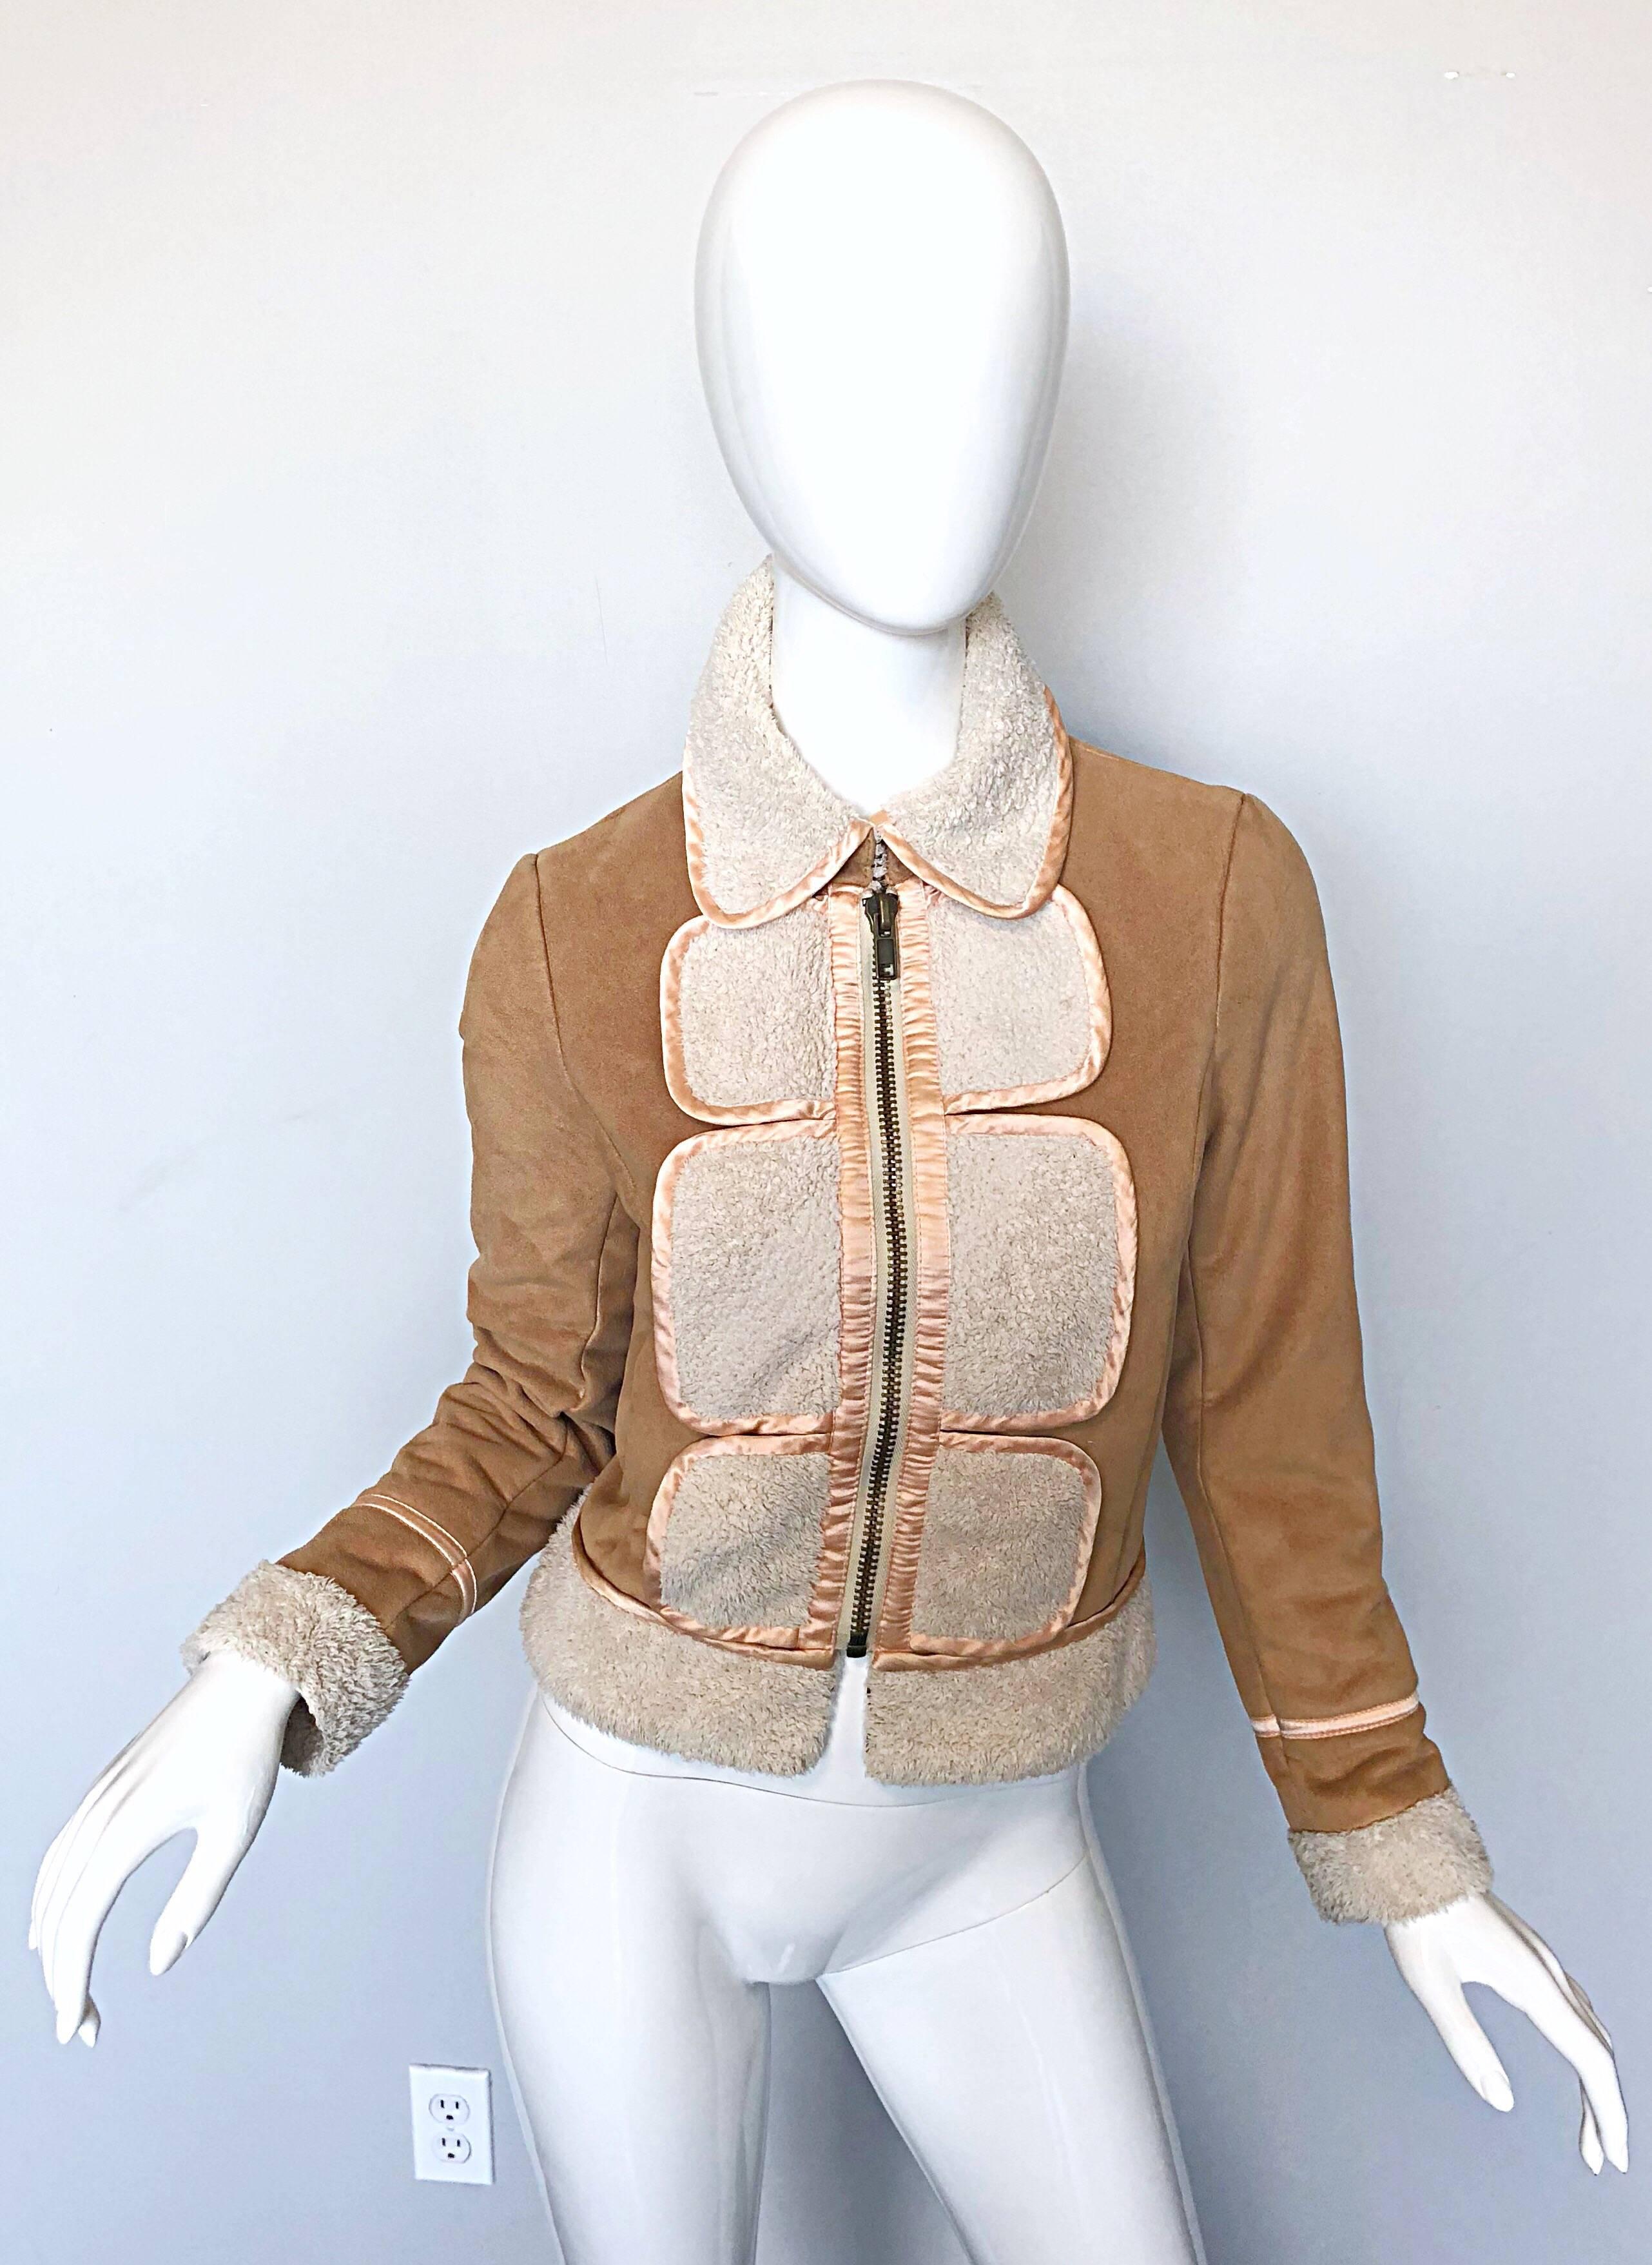 Chic early 2000s 3.1 PHILLIP LIM faux suede and faux shearling trucker style jacket! Features a medium tan soft faux suede, with ivory faux shearling throughout. Full metal zipper up the front with a single hook-and-eye closure at center collar.